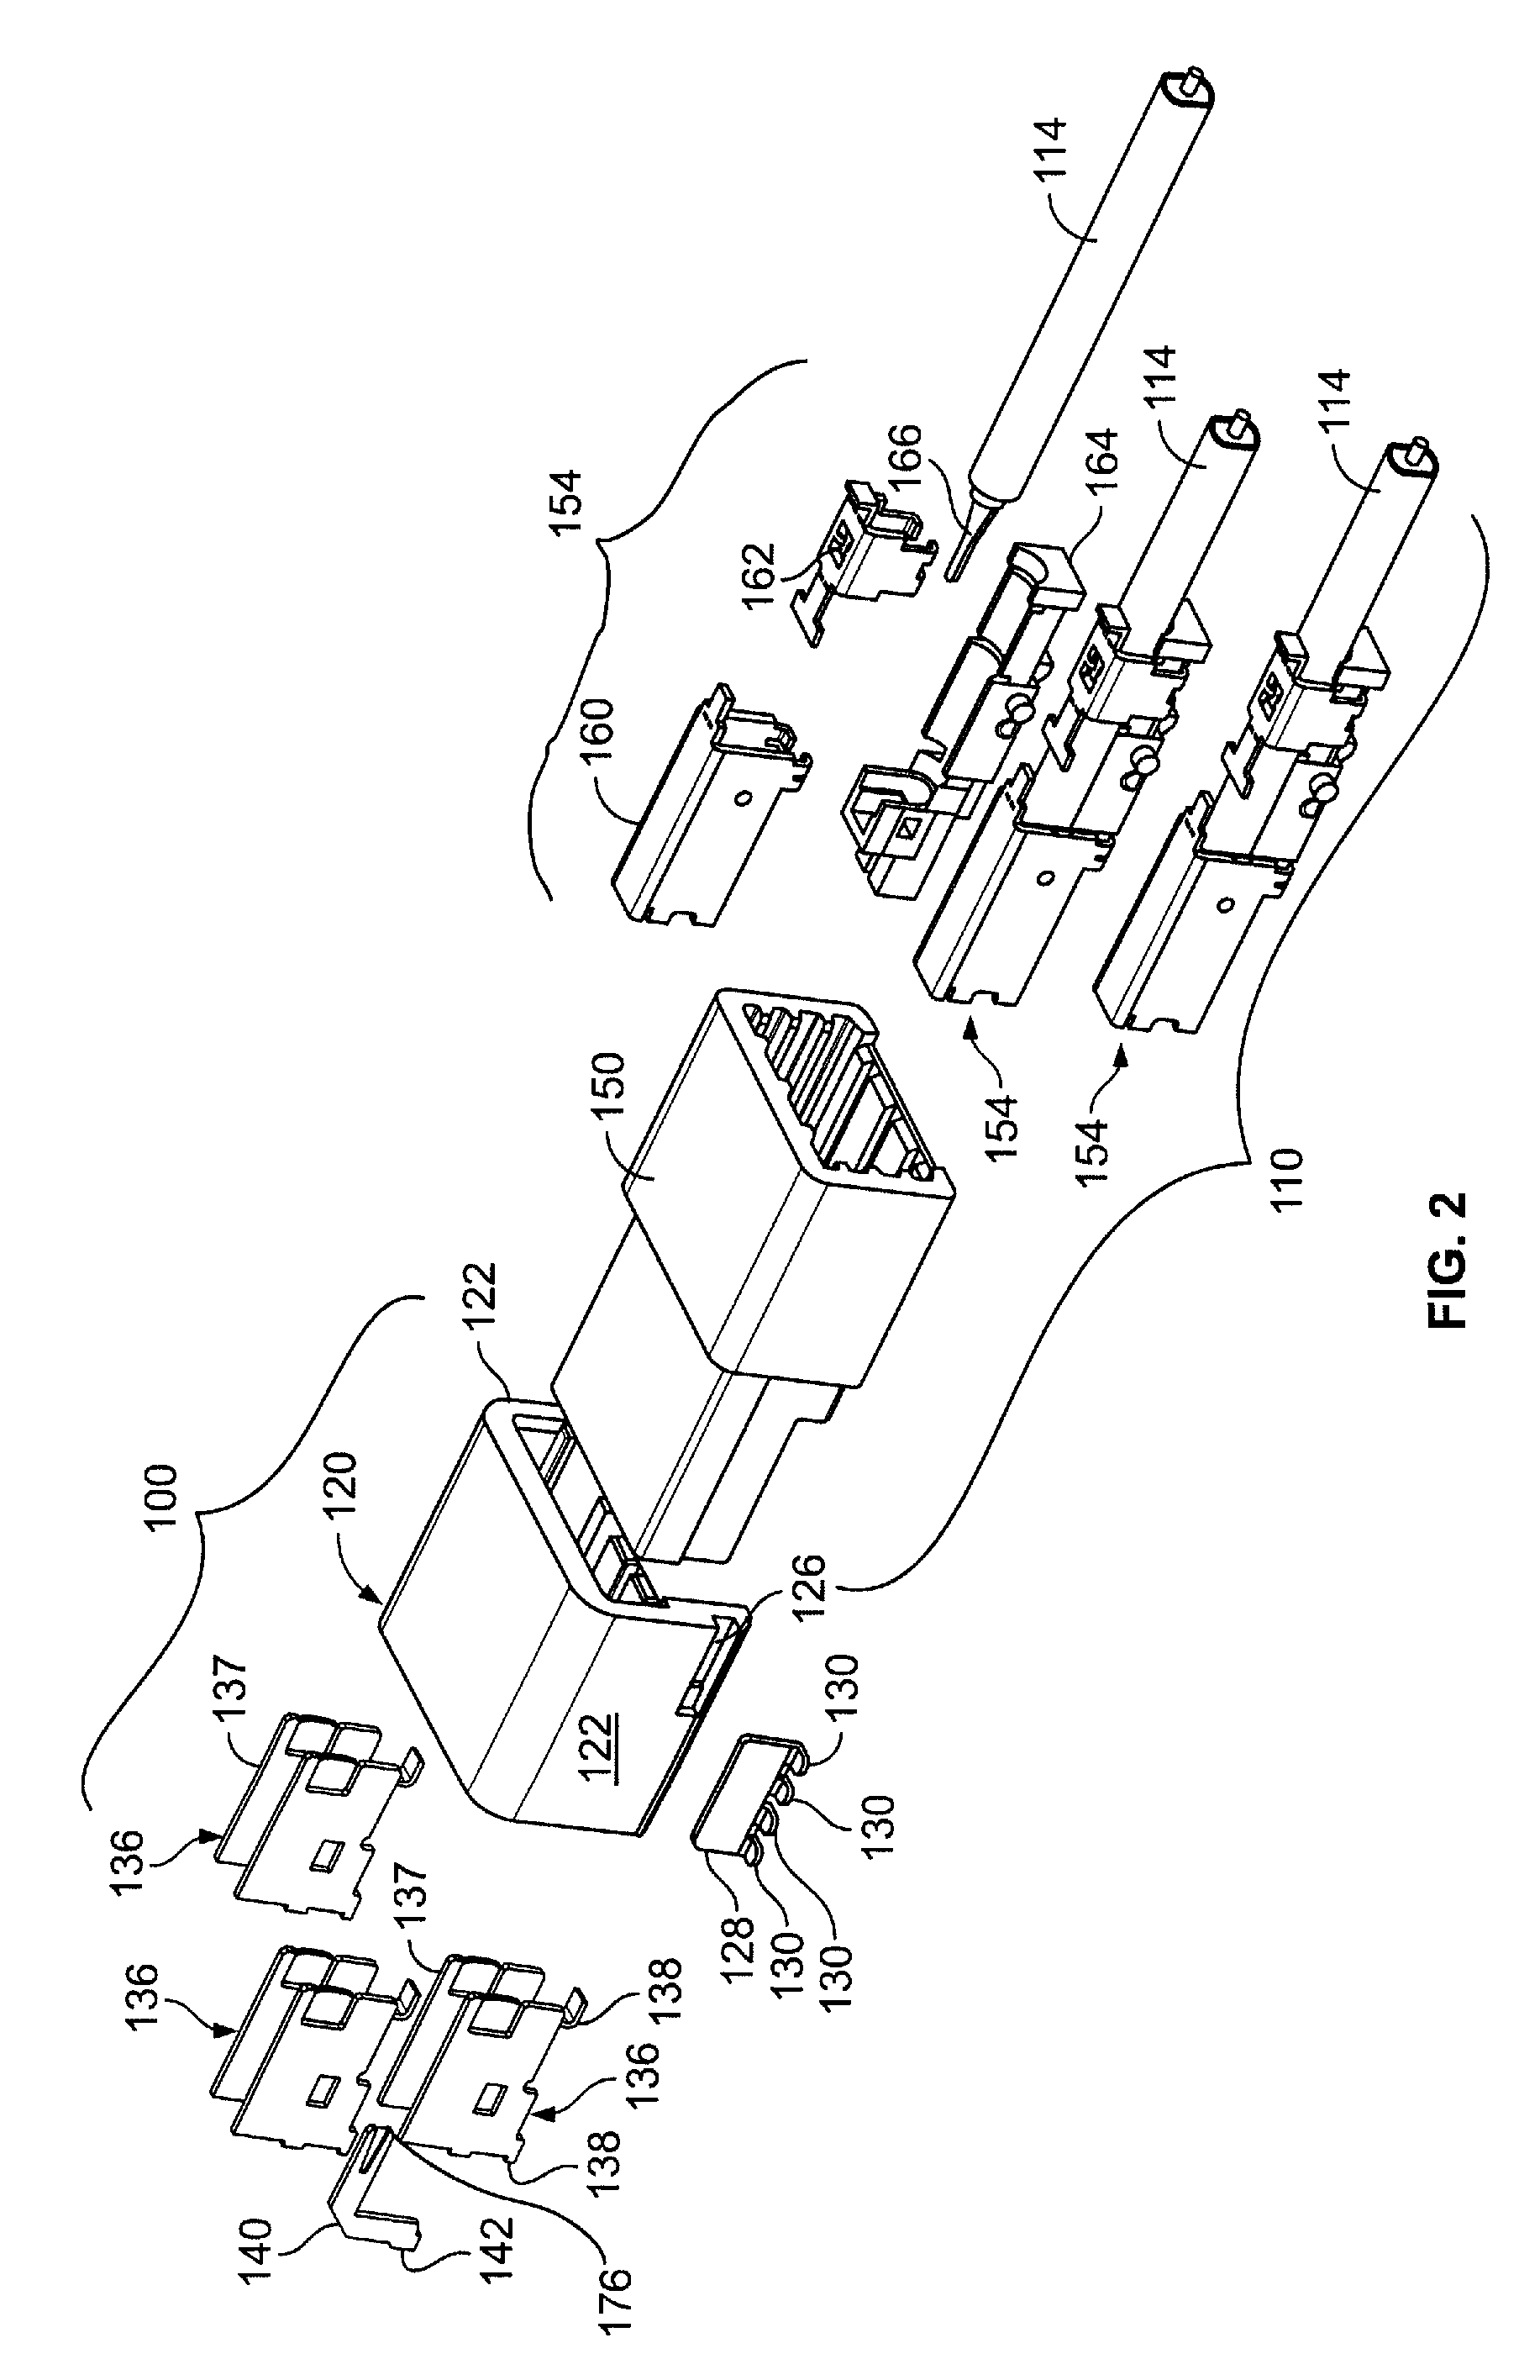 RF connector with adjacent shielded modules